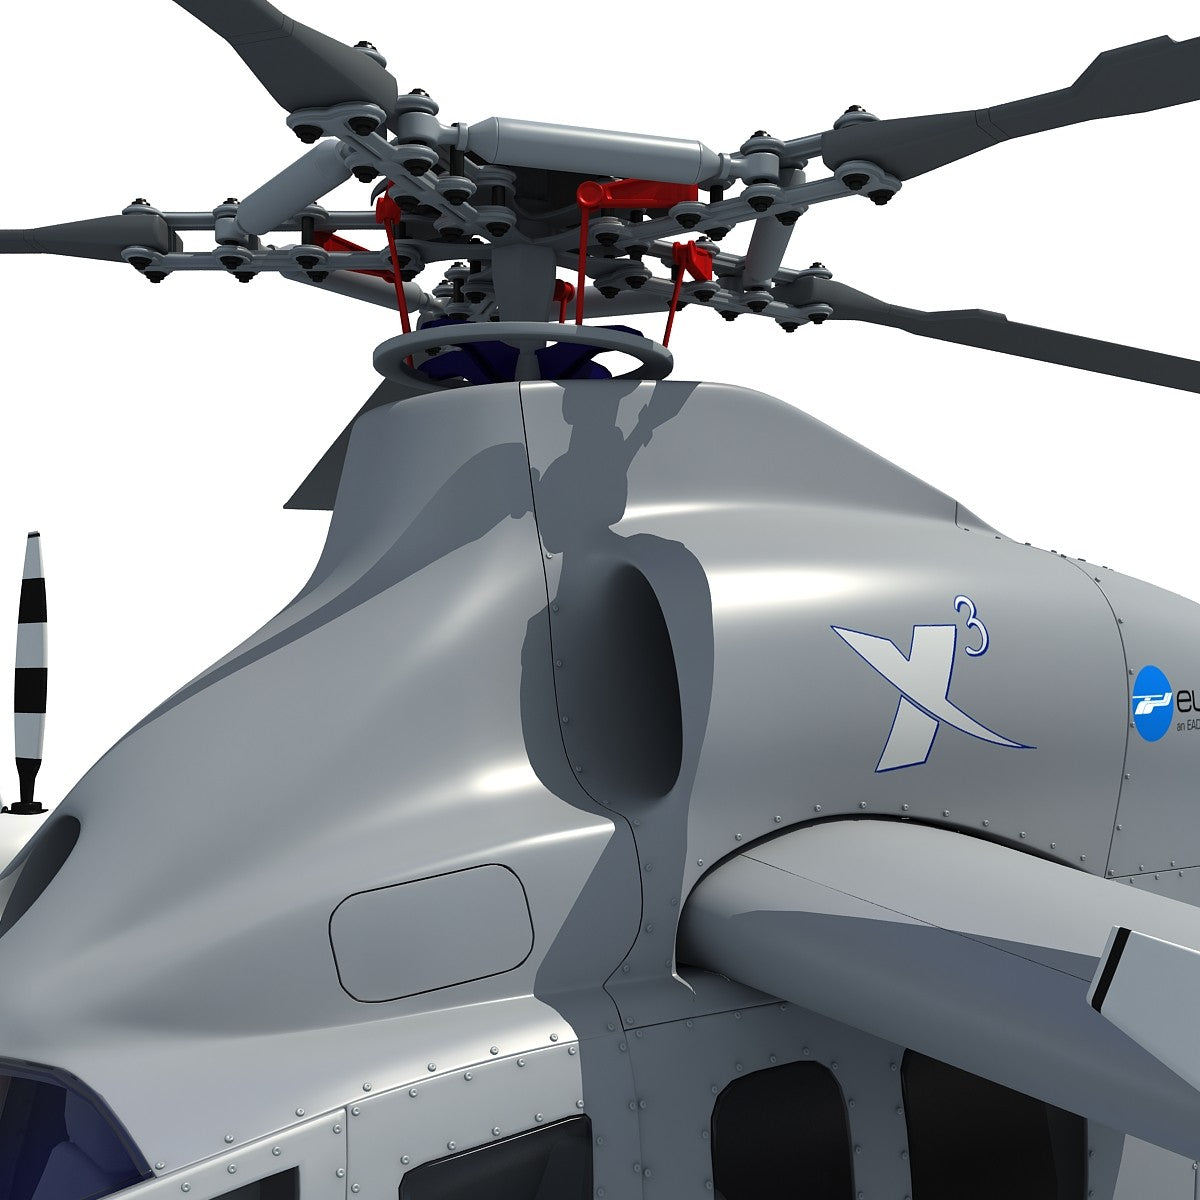 Eurocopter X3 Helicopter